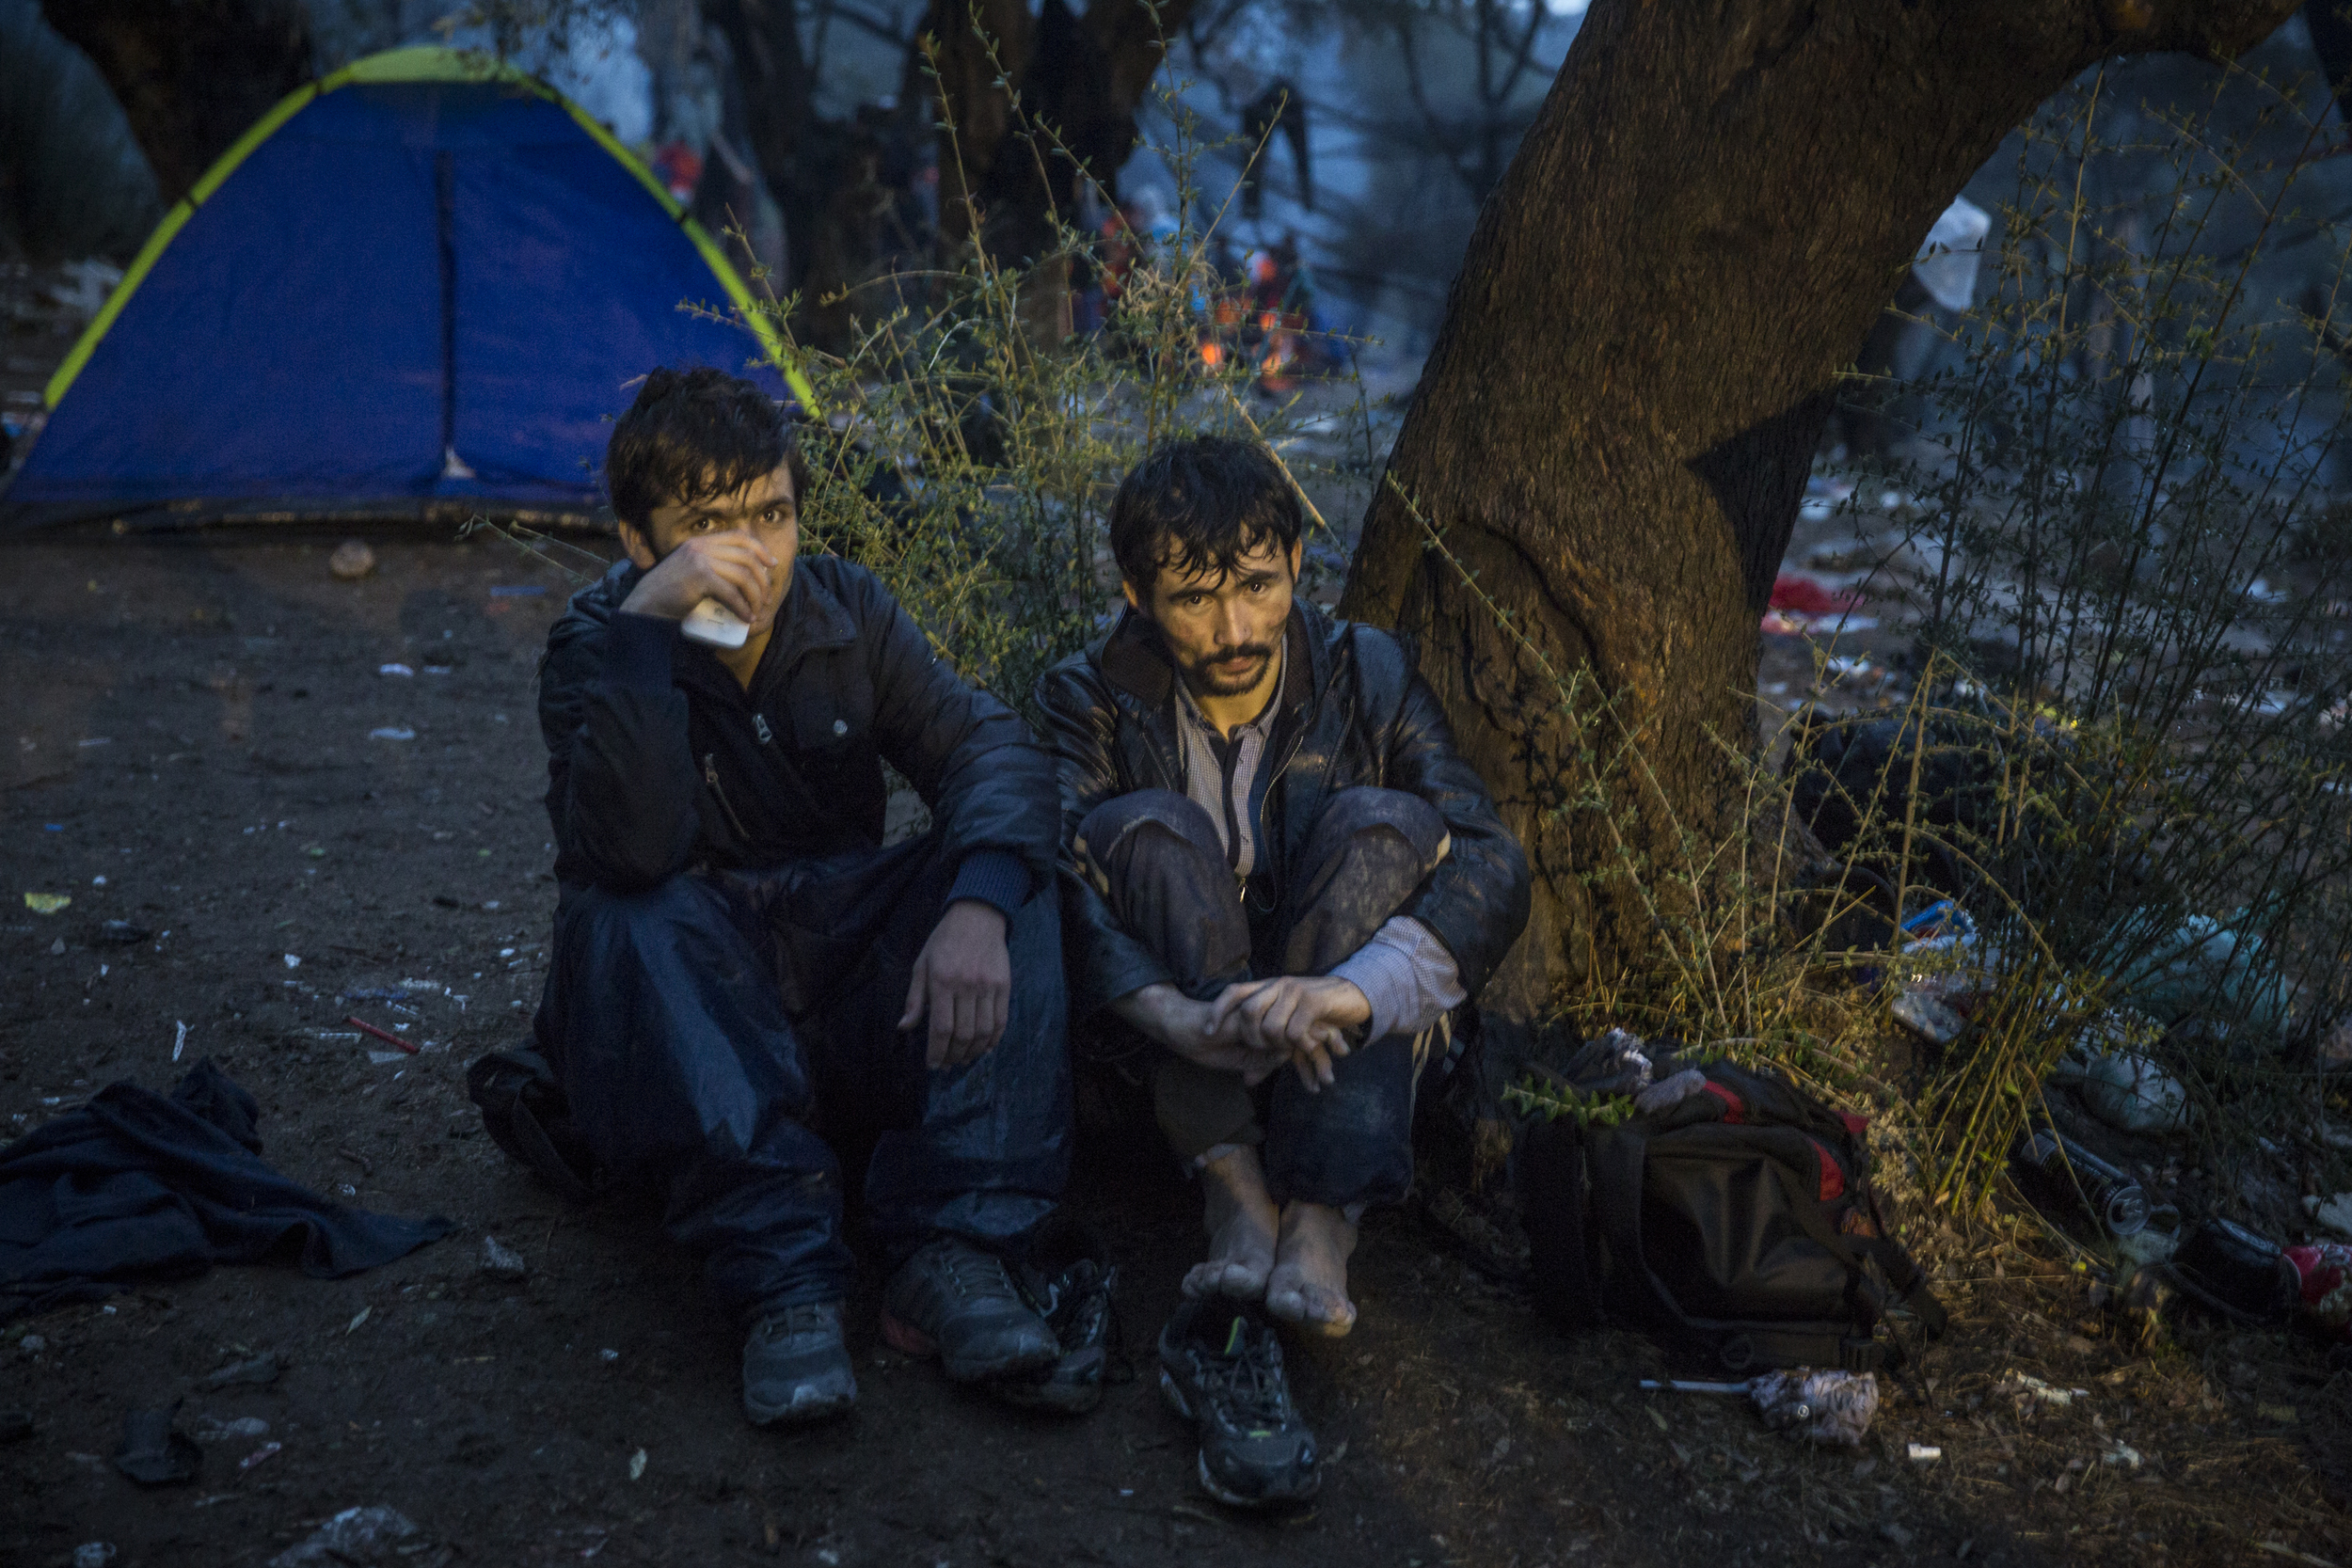   Two Afghan refugees camp in the rain outside Moria  